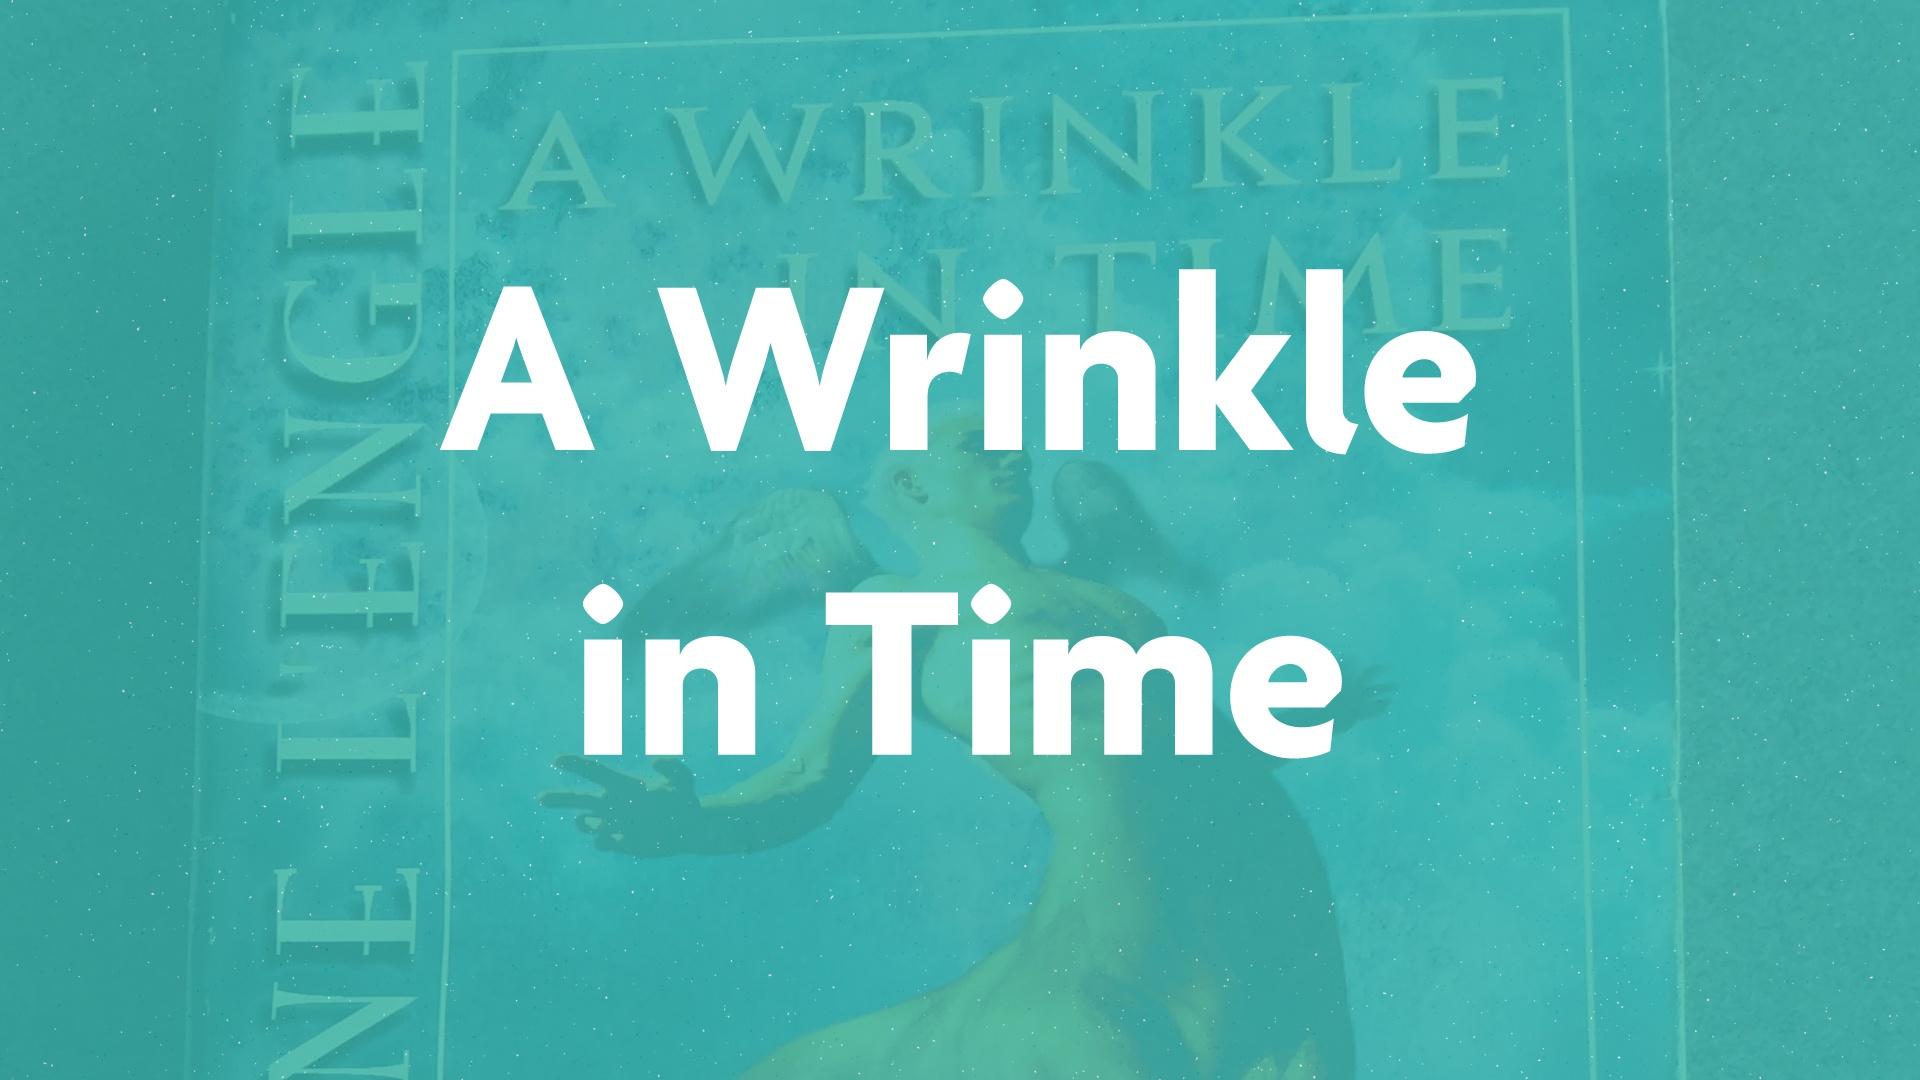 A Wrinkle in Time book submission card on a green background.